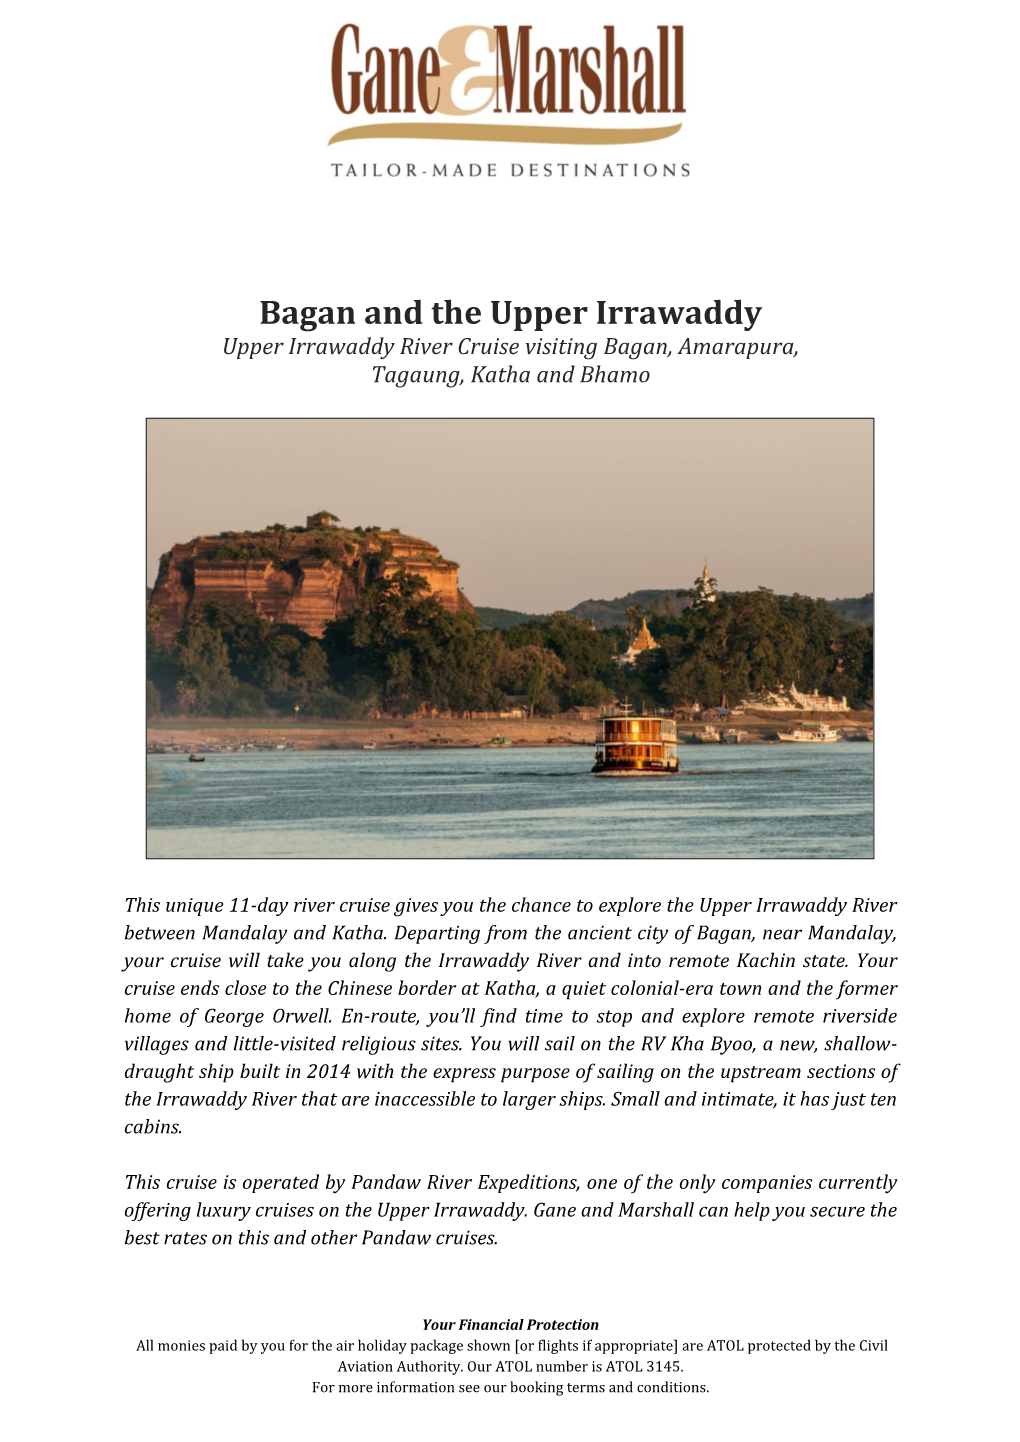 Bagan and the Upper Irrawaddy River Cruise